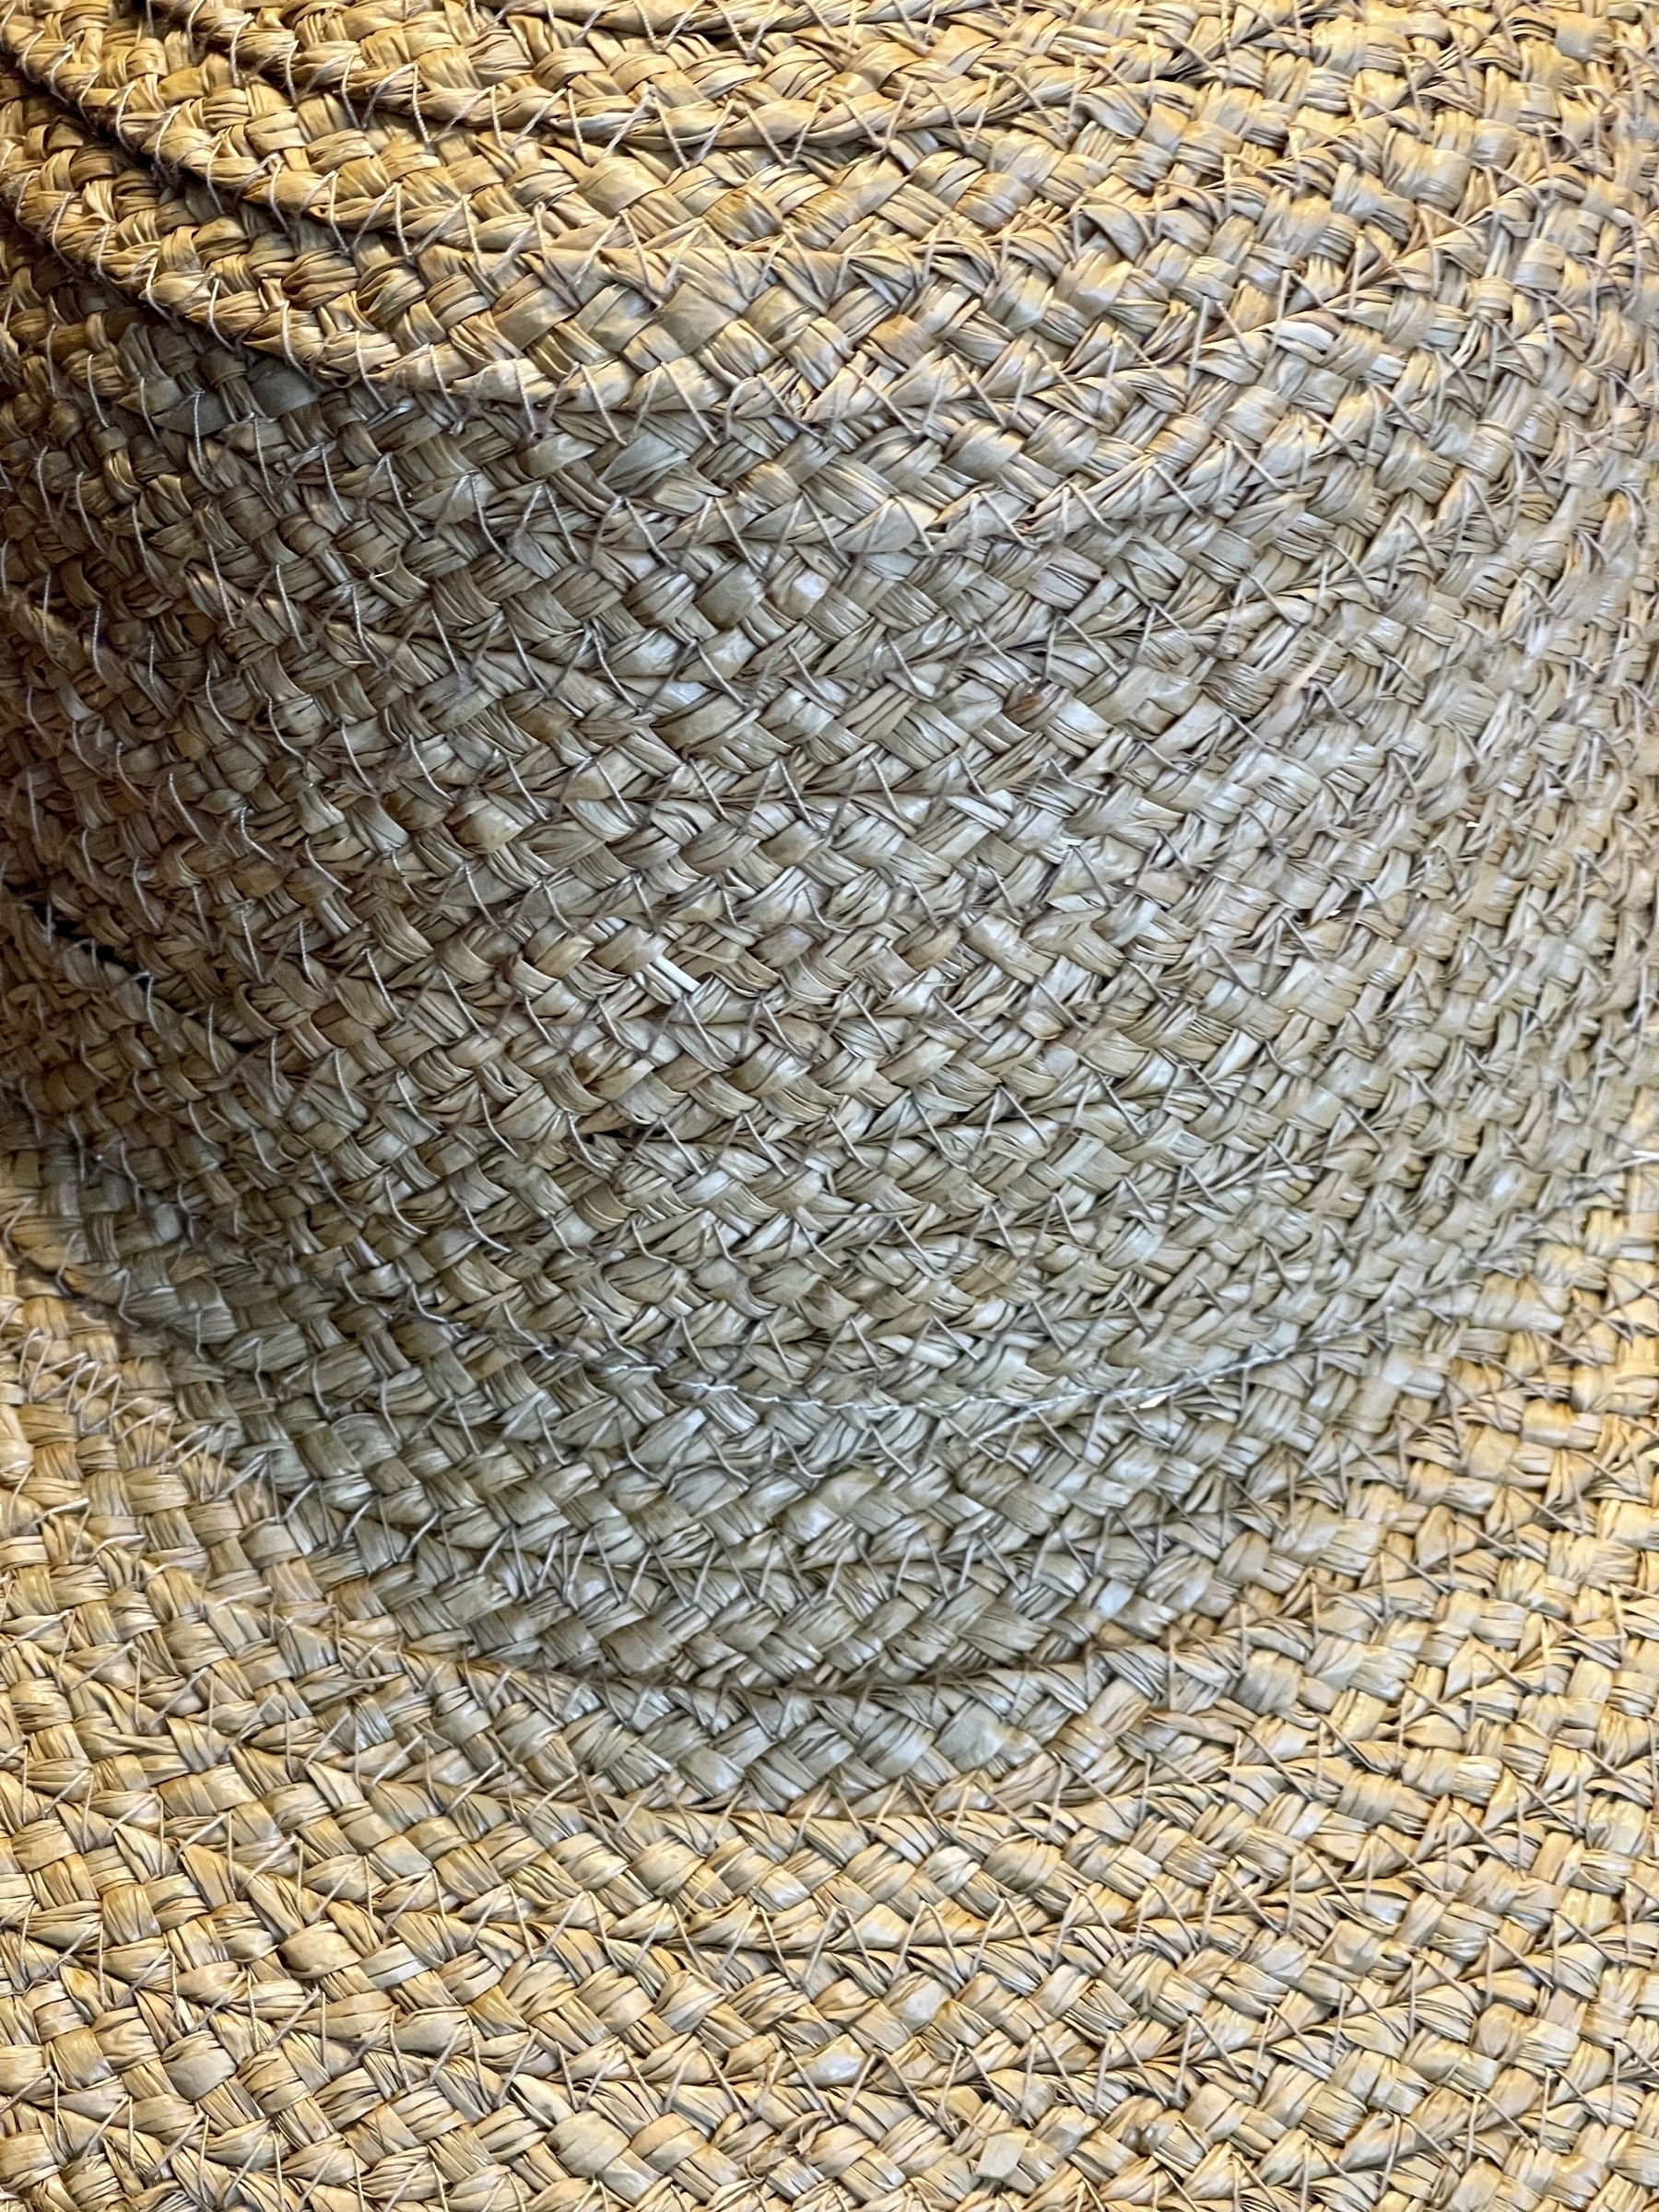 Closeup of crown and brim of a straw hat.